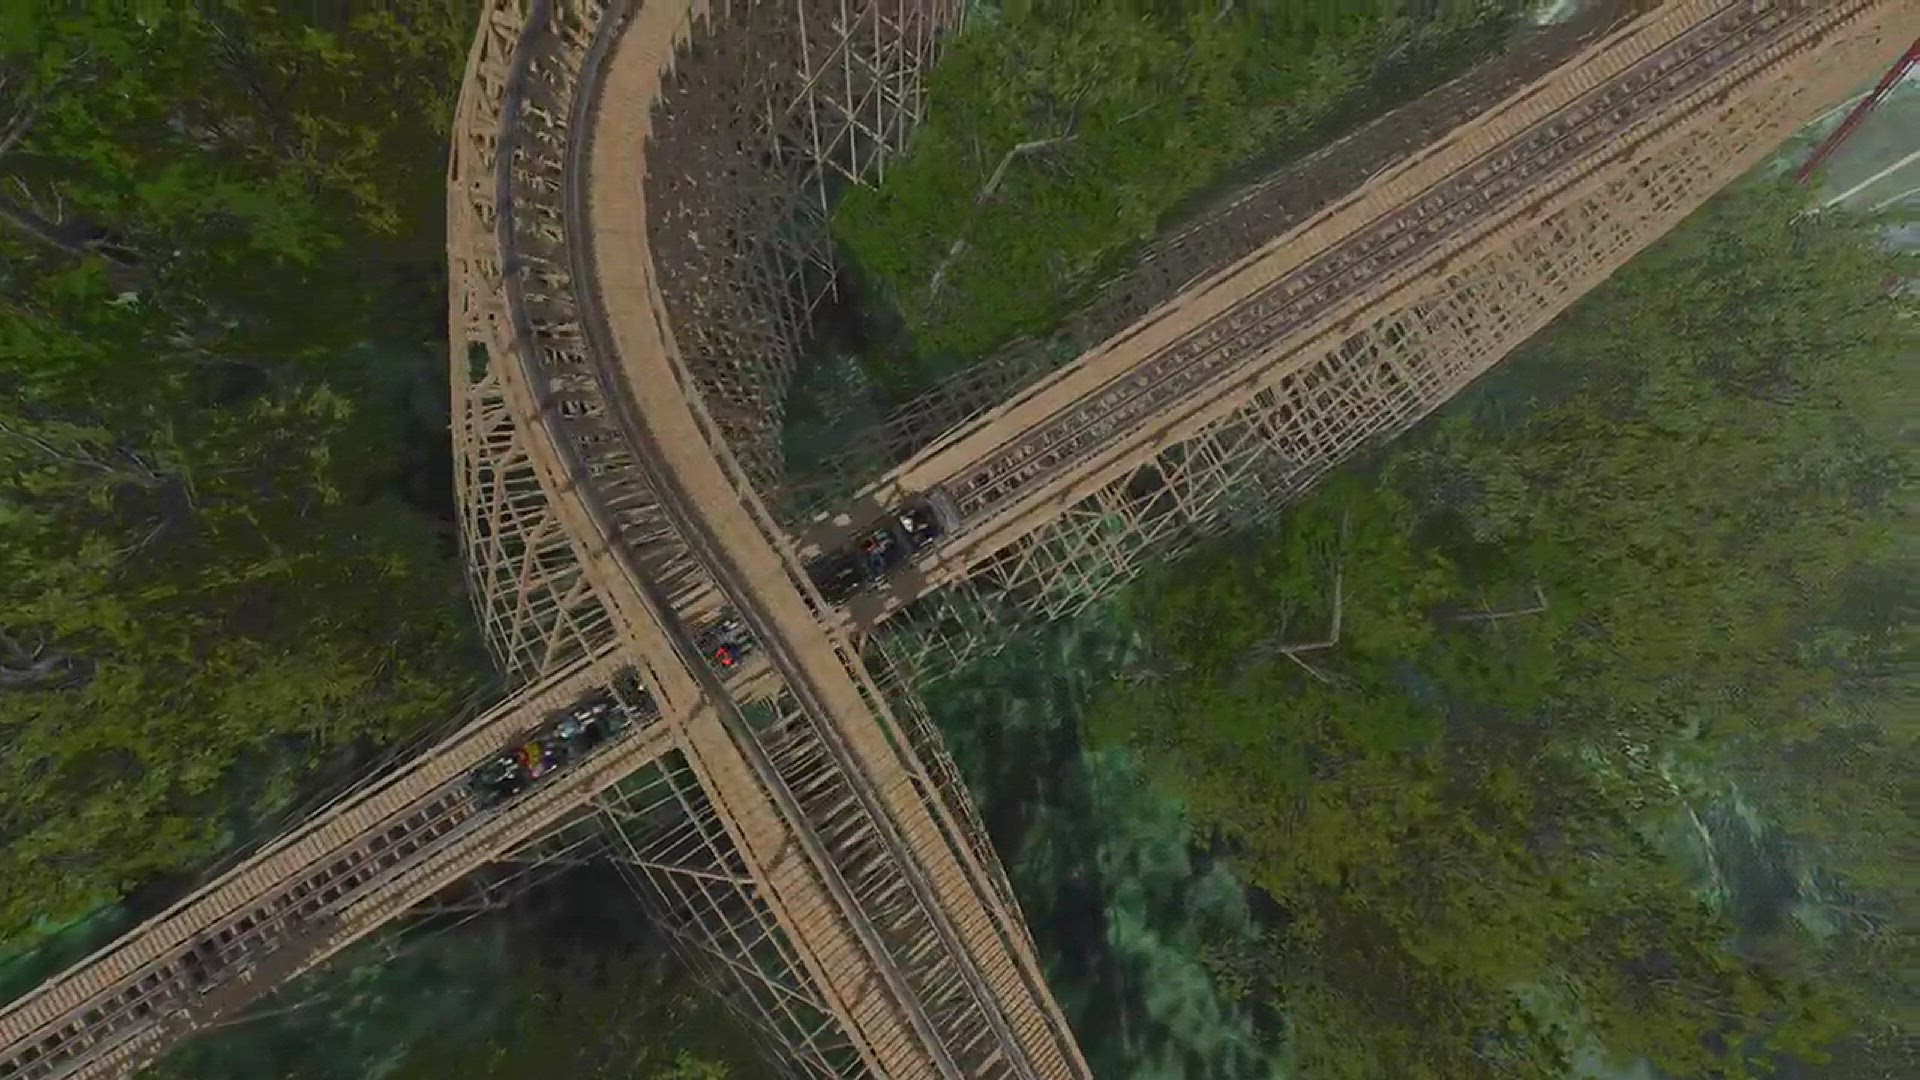 July 29, 2016: Check out virtual footage of Kings Island's new Mystic Timbers roller coaster.